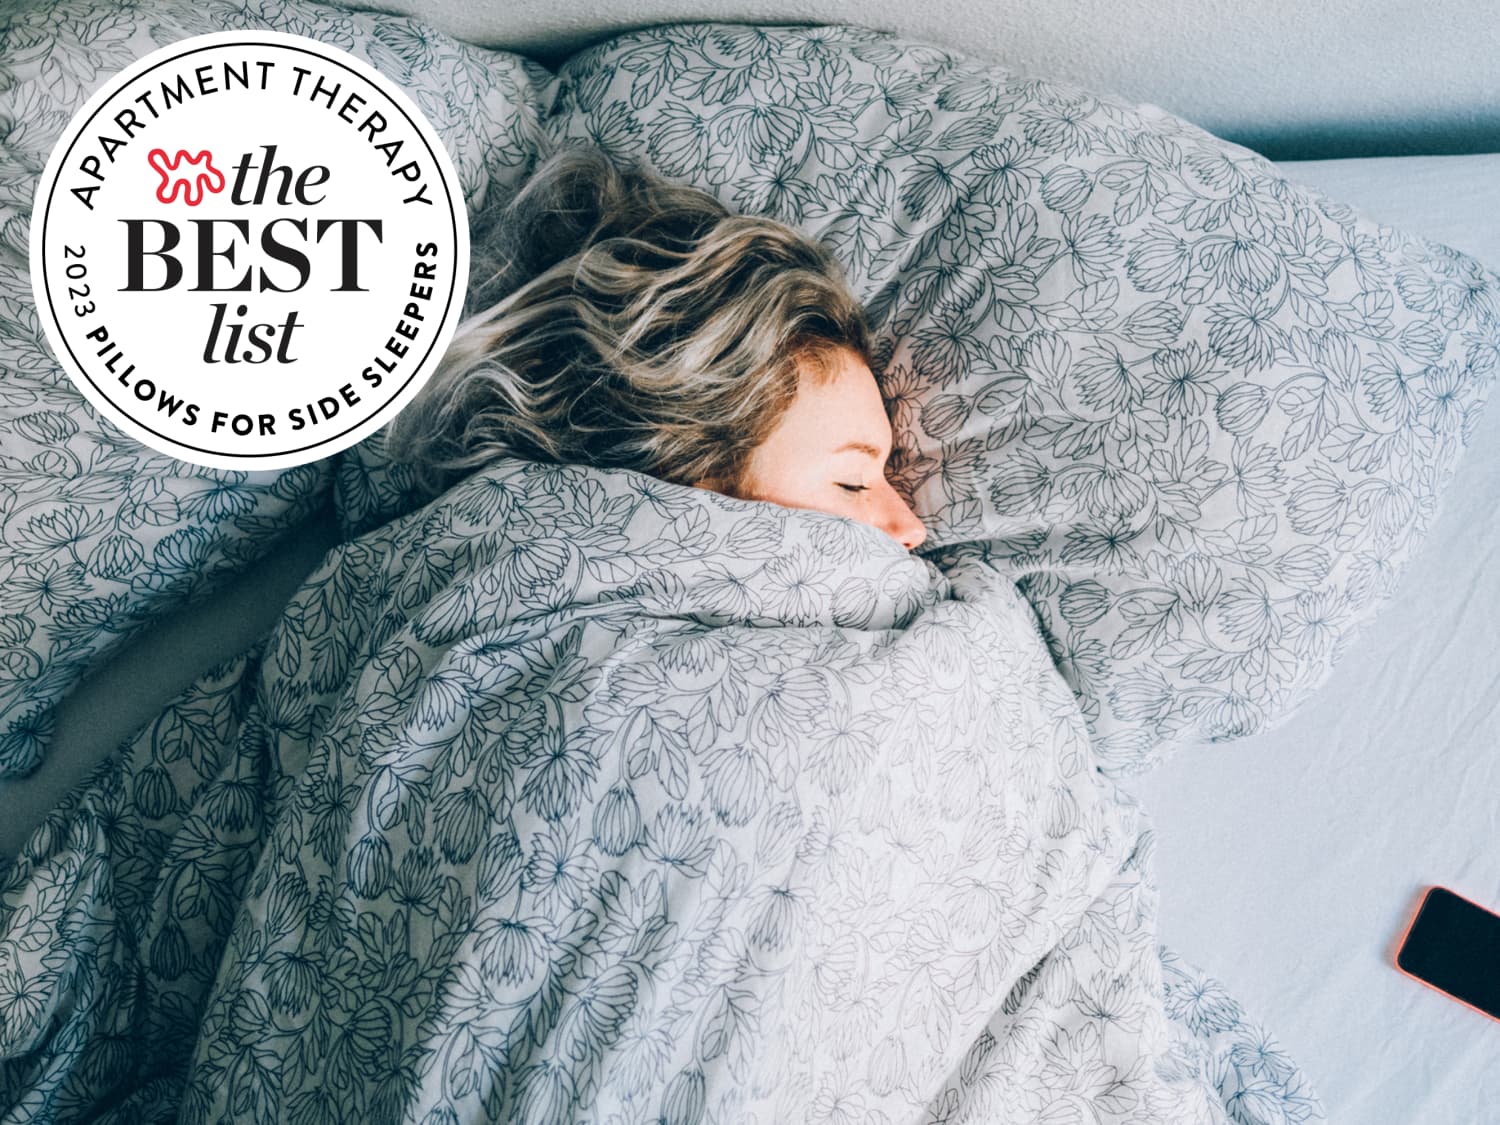 The Best Pillow for Side Sleepers - Comfort and Support